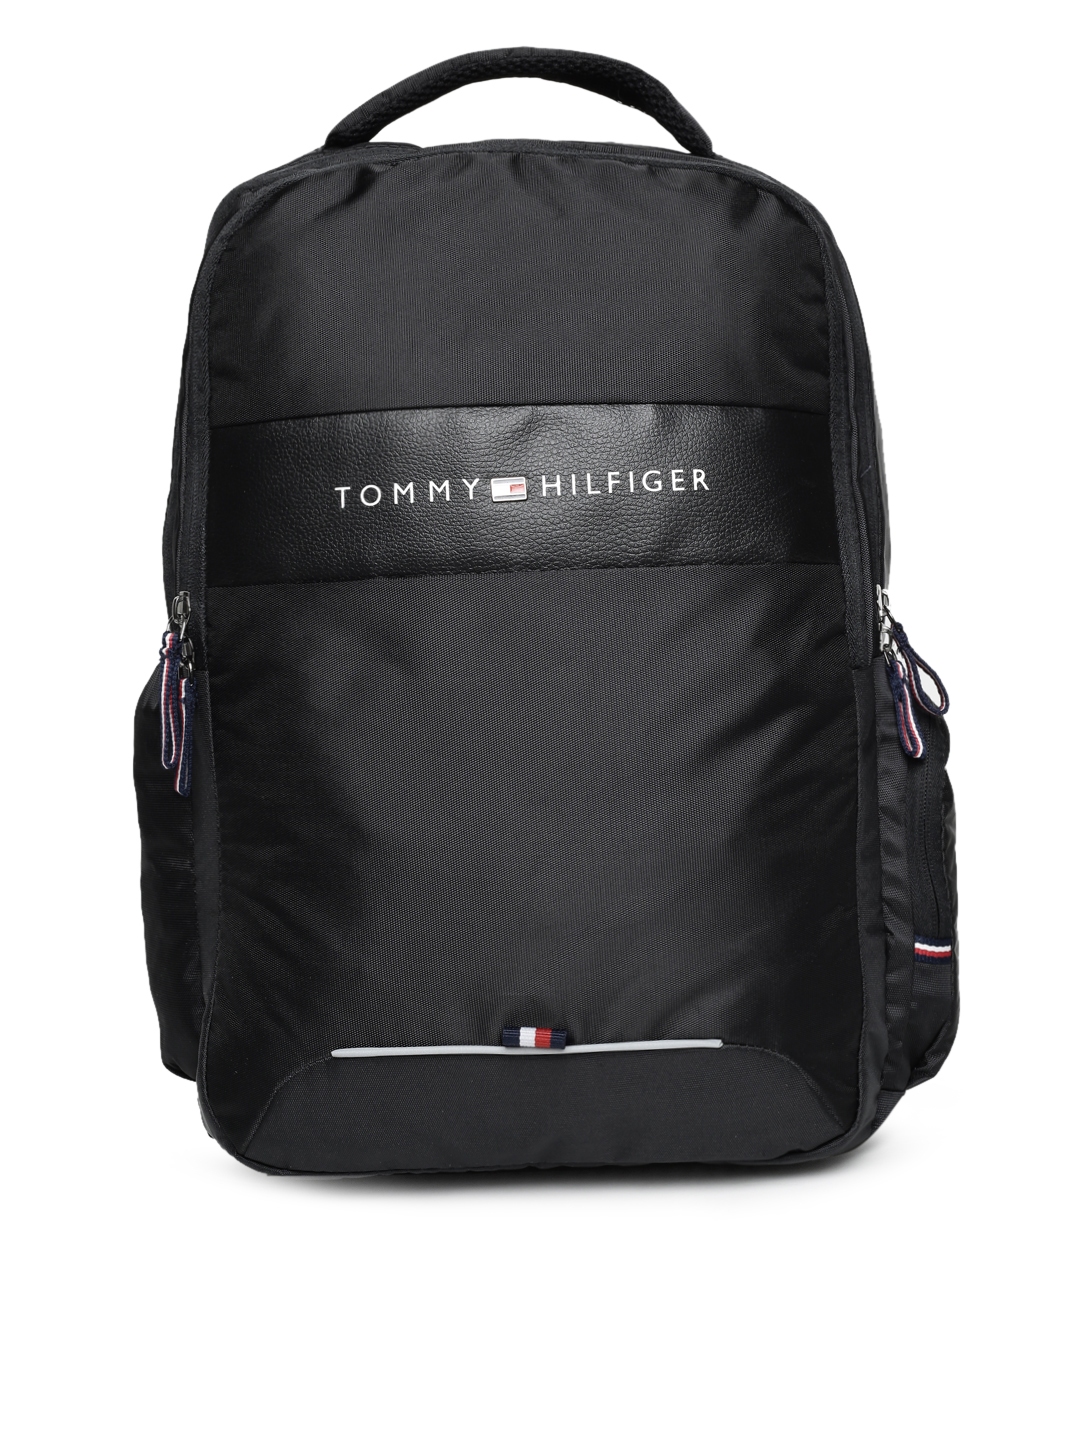 Discover 128+ tommy and hilfiger bags best - 3tdesign.edu.vn